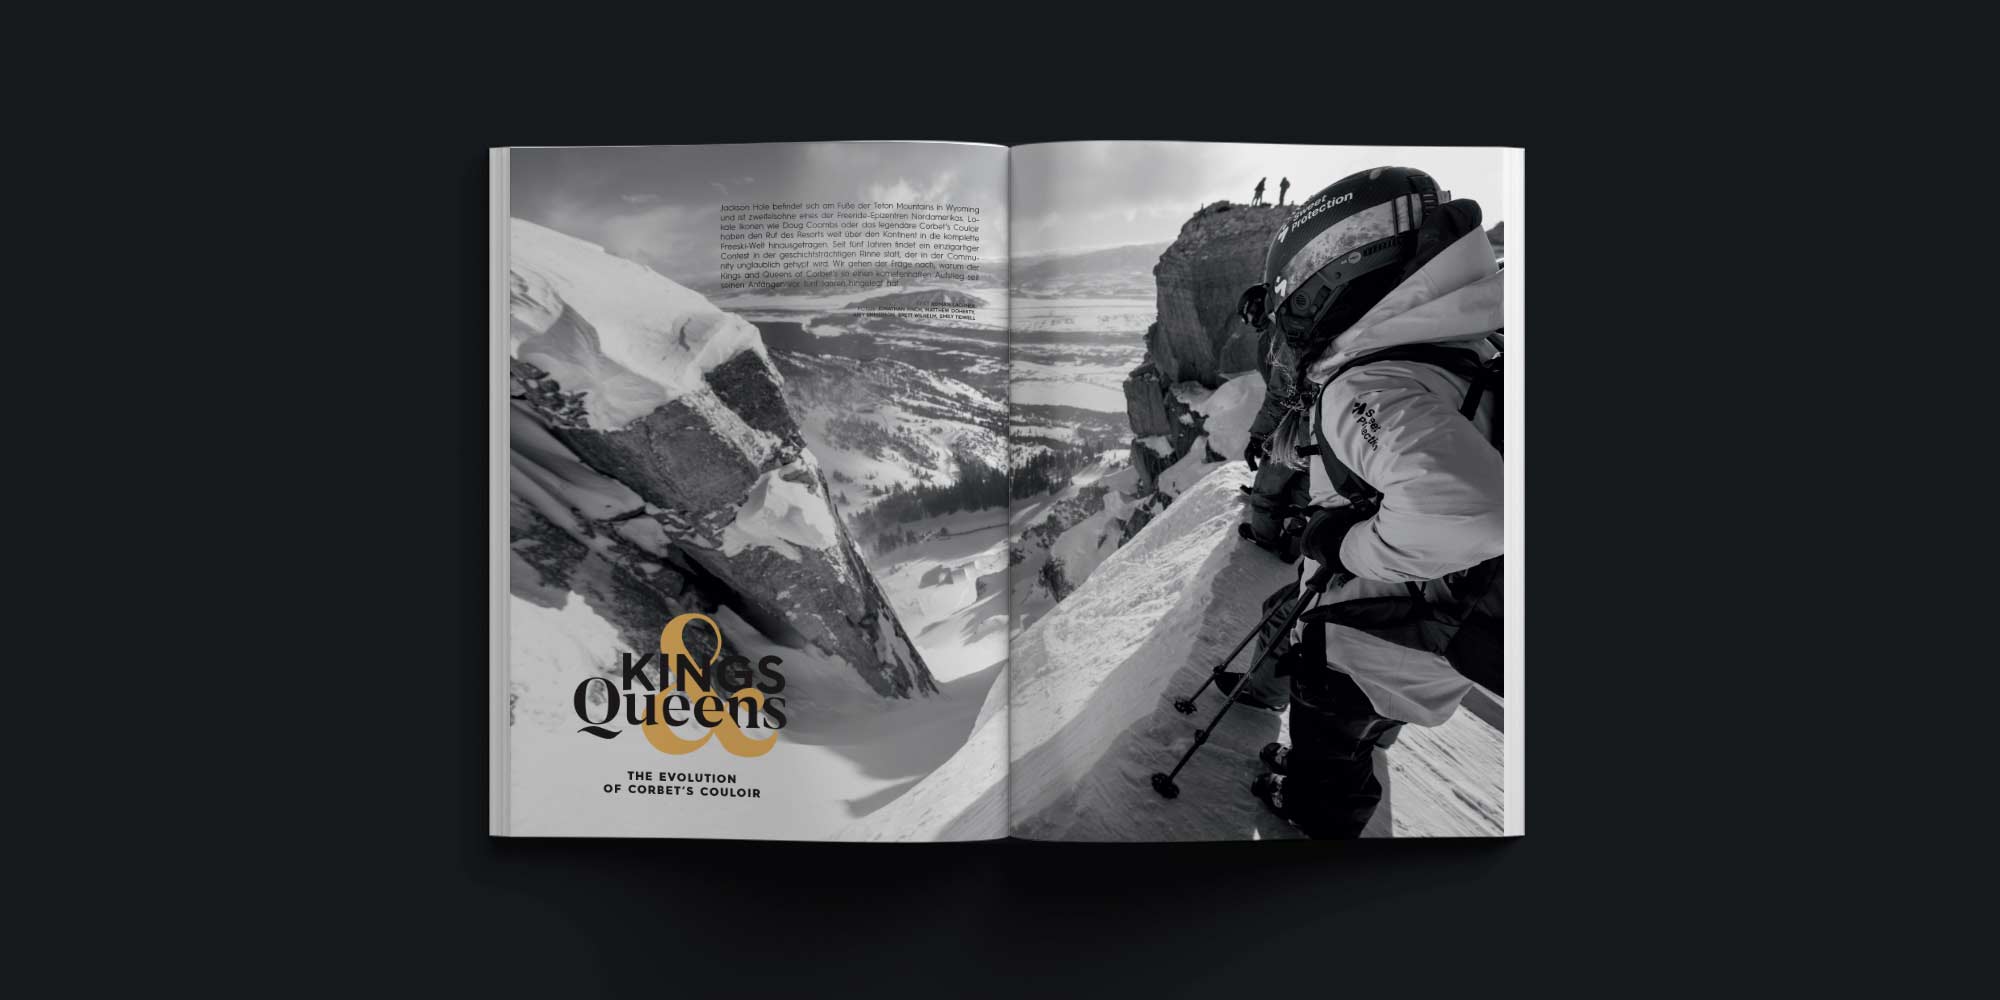 PRIME Skiing #37 – Artikel Highlights: Kings & Queens – The Evolution of Corbet’s Couloir